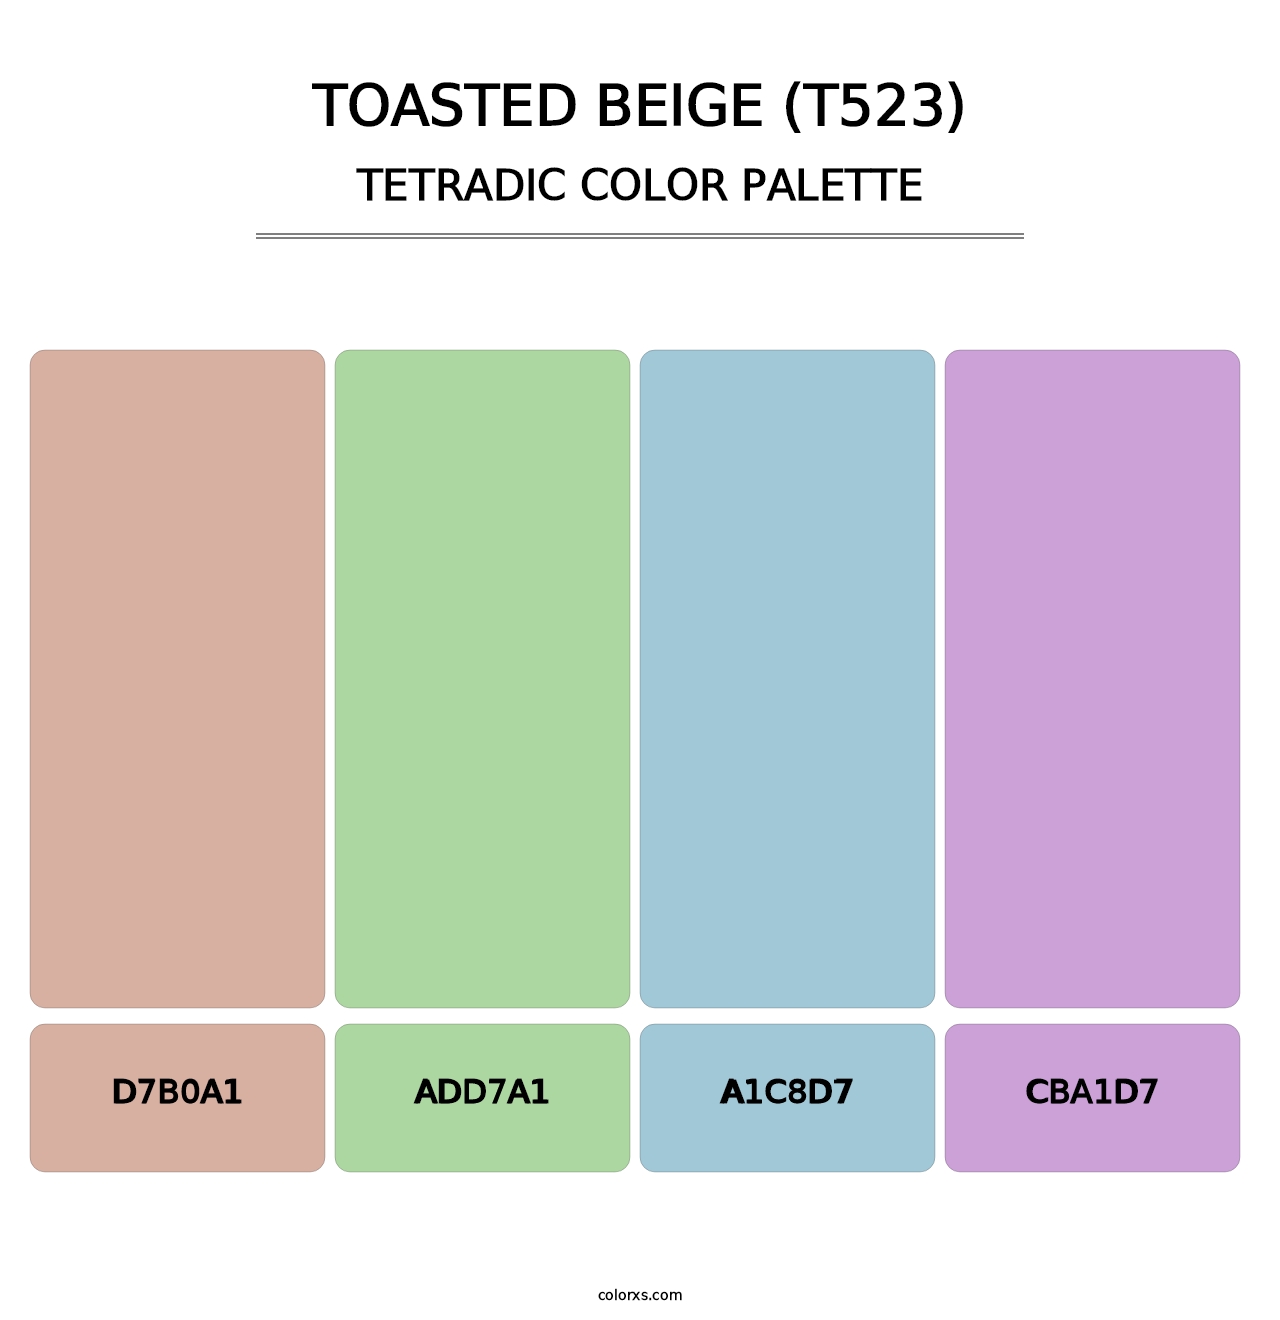 Toasted Beige (T523) - Tetradic Color Palette